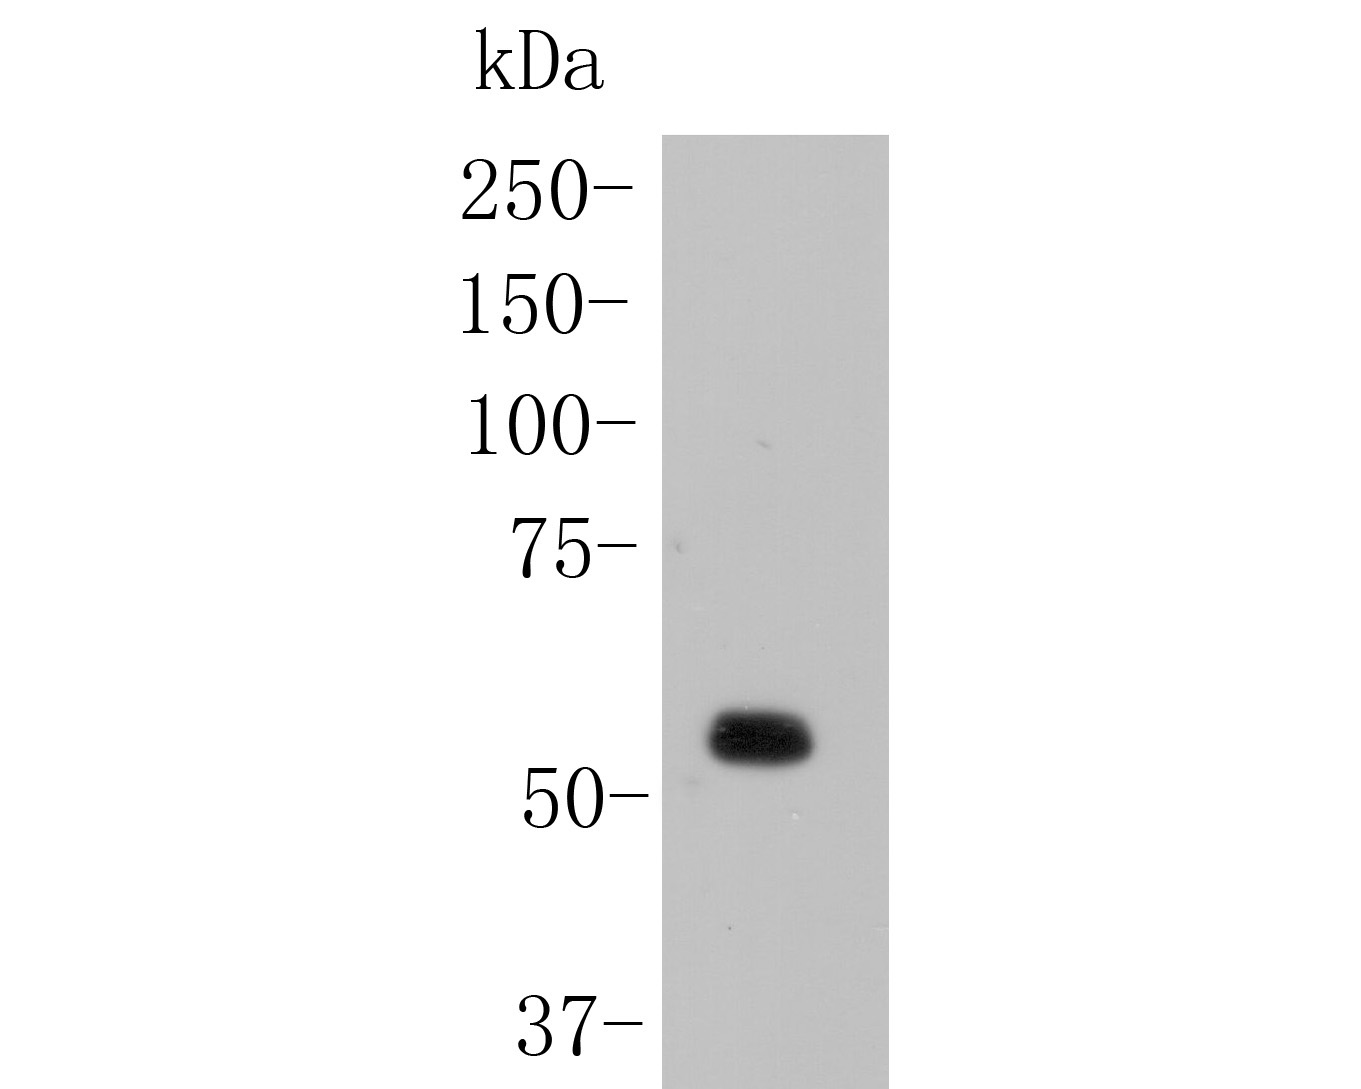 Western blot analysis of NHE-1 on rat skin lysates. Proteins were transferred to a PVDF membrane and blocked with 5% BSA in PBS for 1 hour at room temperature. The primary antibody (ER1902-51, 1/1000) was used in 5% BSA at room temperature for 2 hours. Goat Anti-Rabbit IgG - HRP Secondary Antibody (HA1001) at 1:5,000 dilution was used for 1 hour at room temperature.